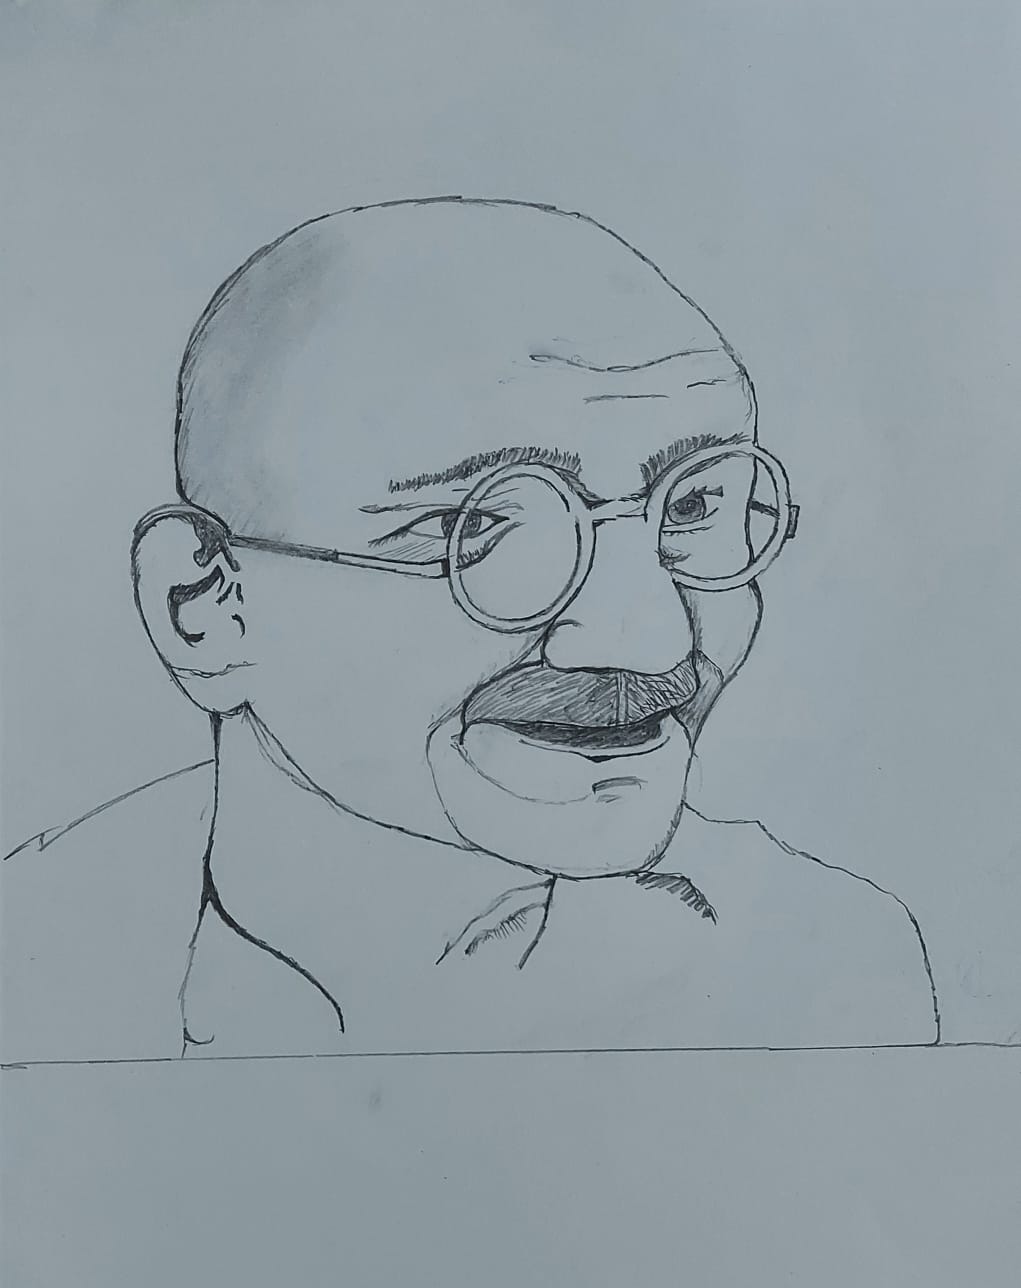 How to draw Mahatma Gandhi step by step tutorial for beginners - YouTube